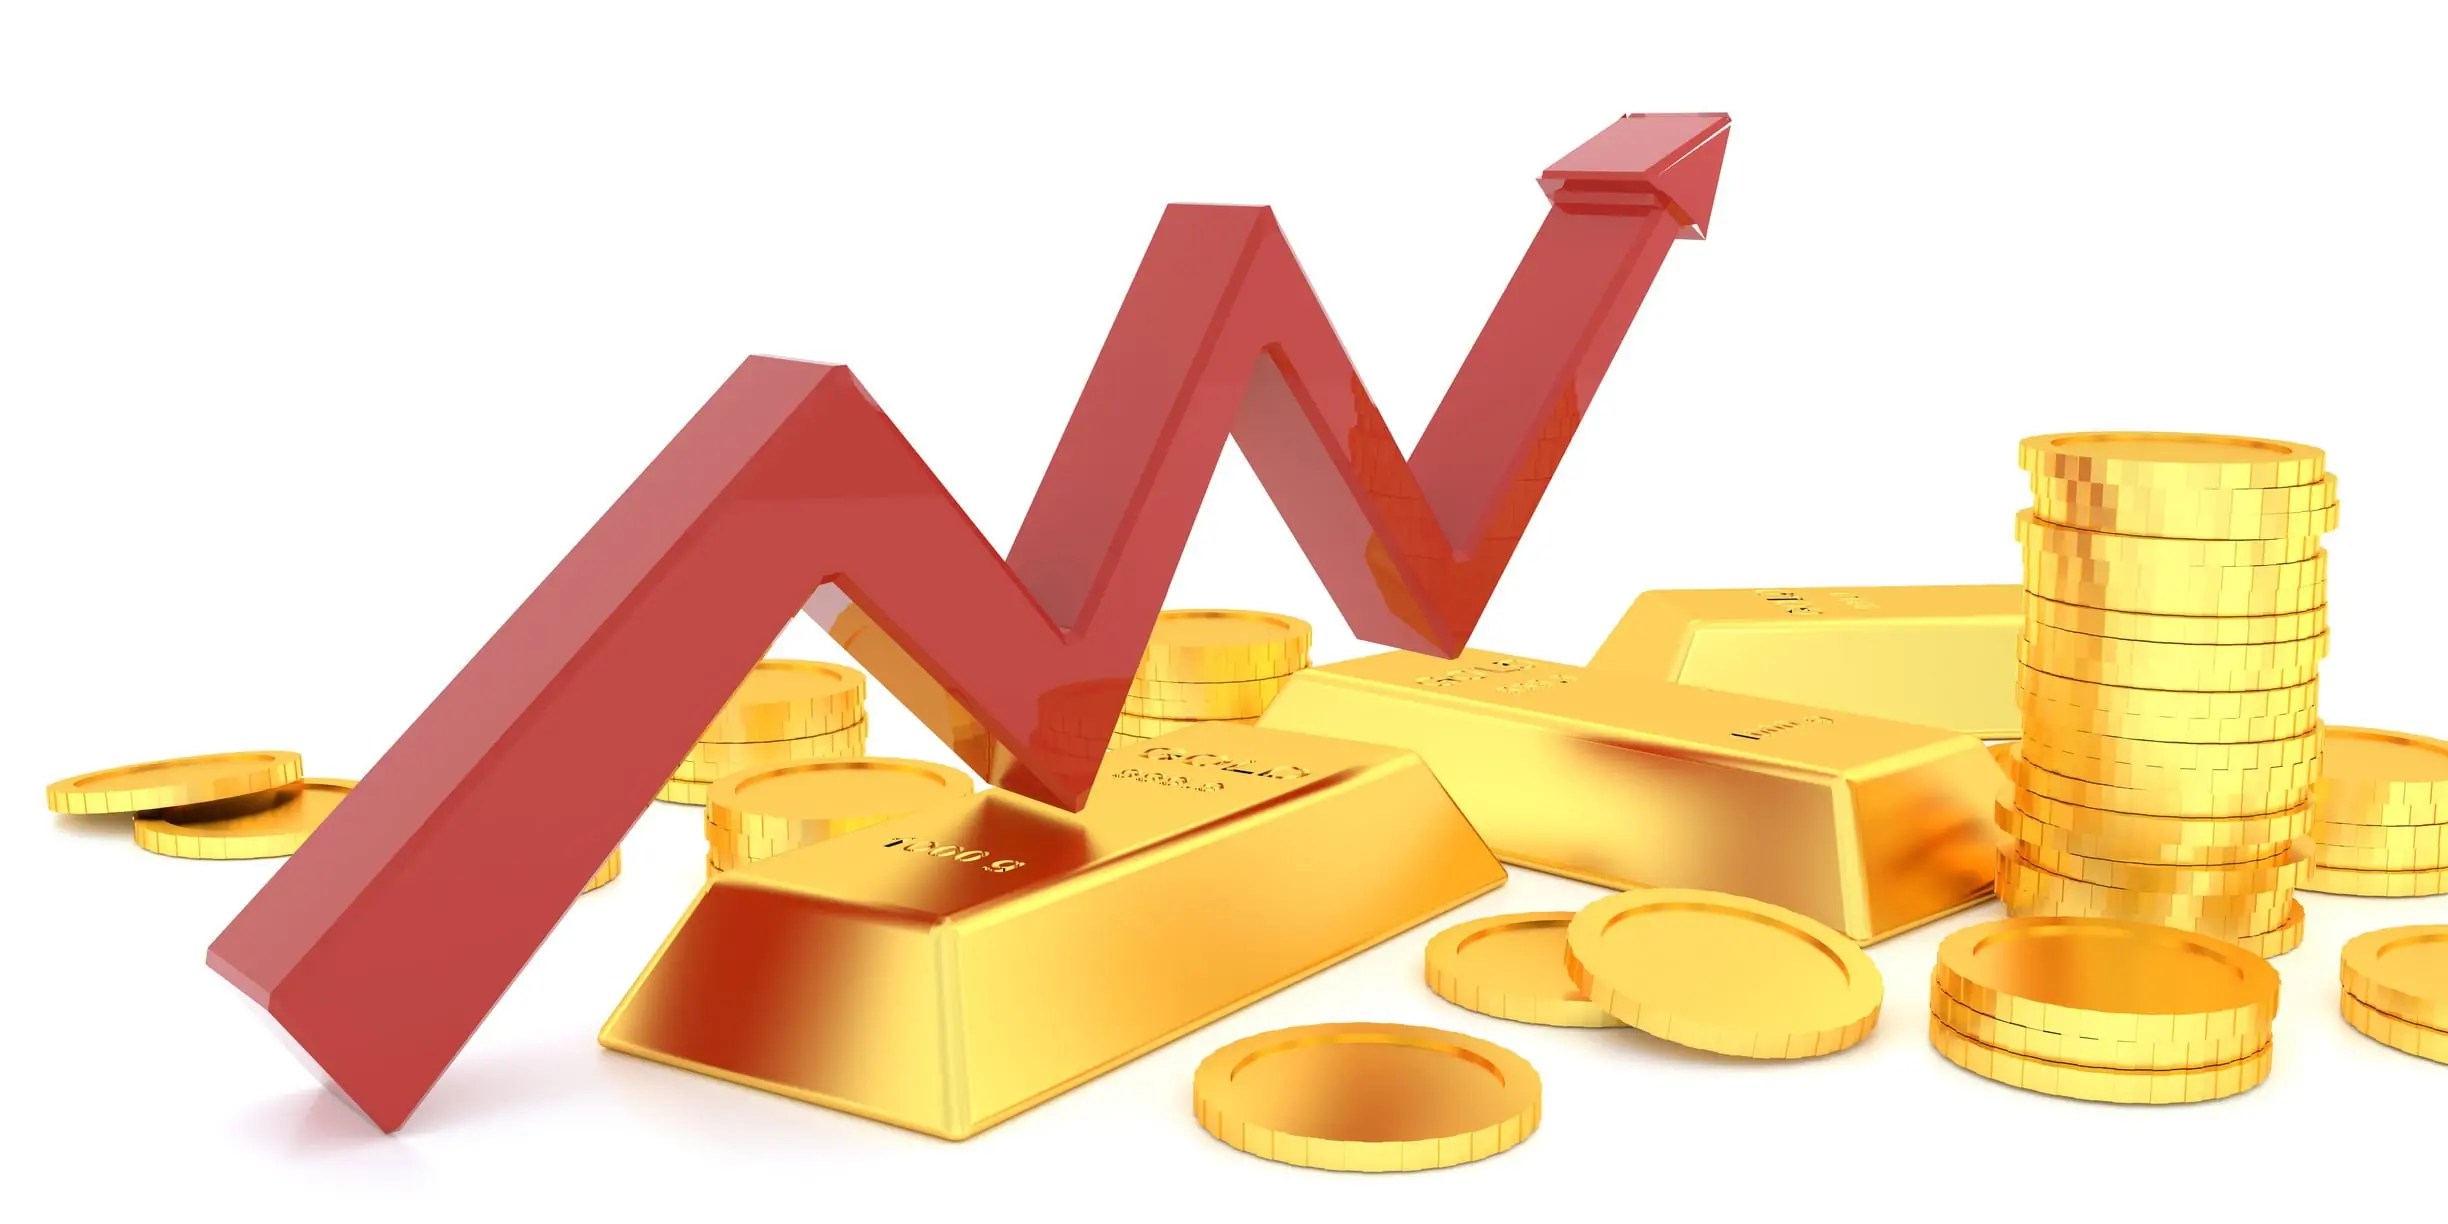 The-Central-Banks-Could-Cause-Gold-Prices-to-Go-Higher.jpg